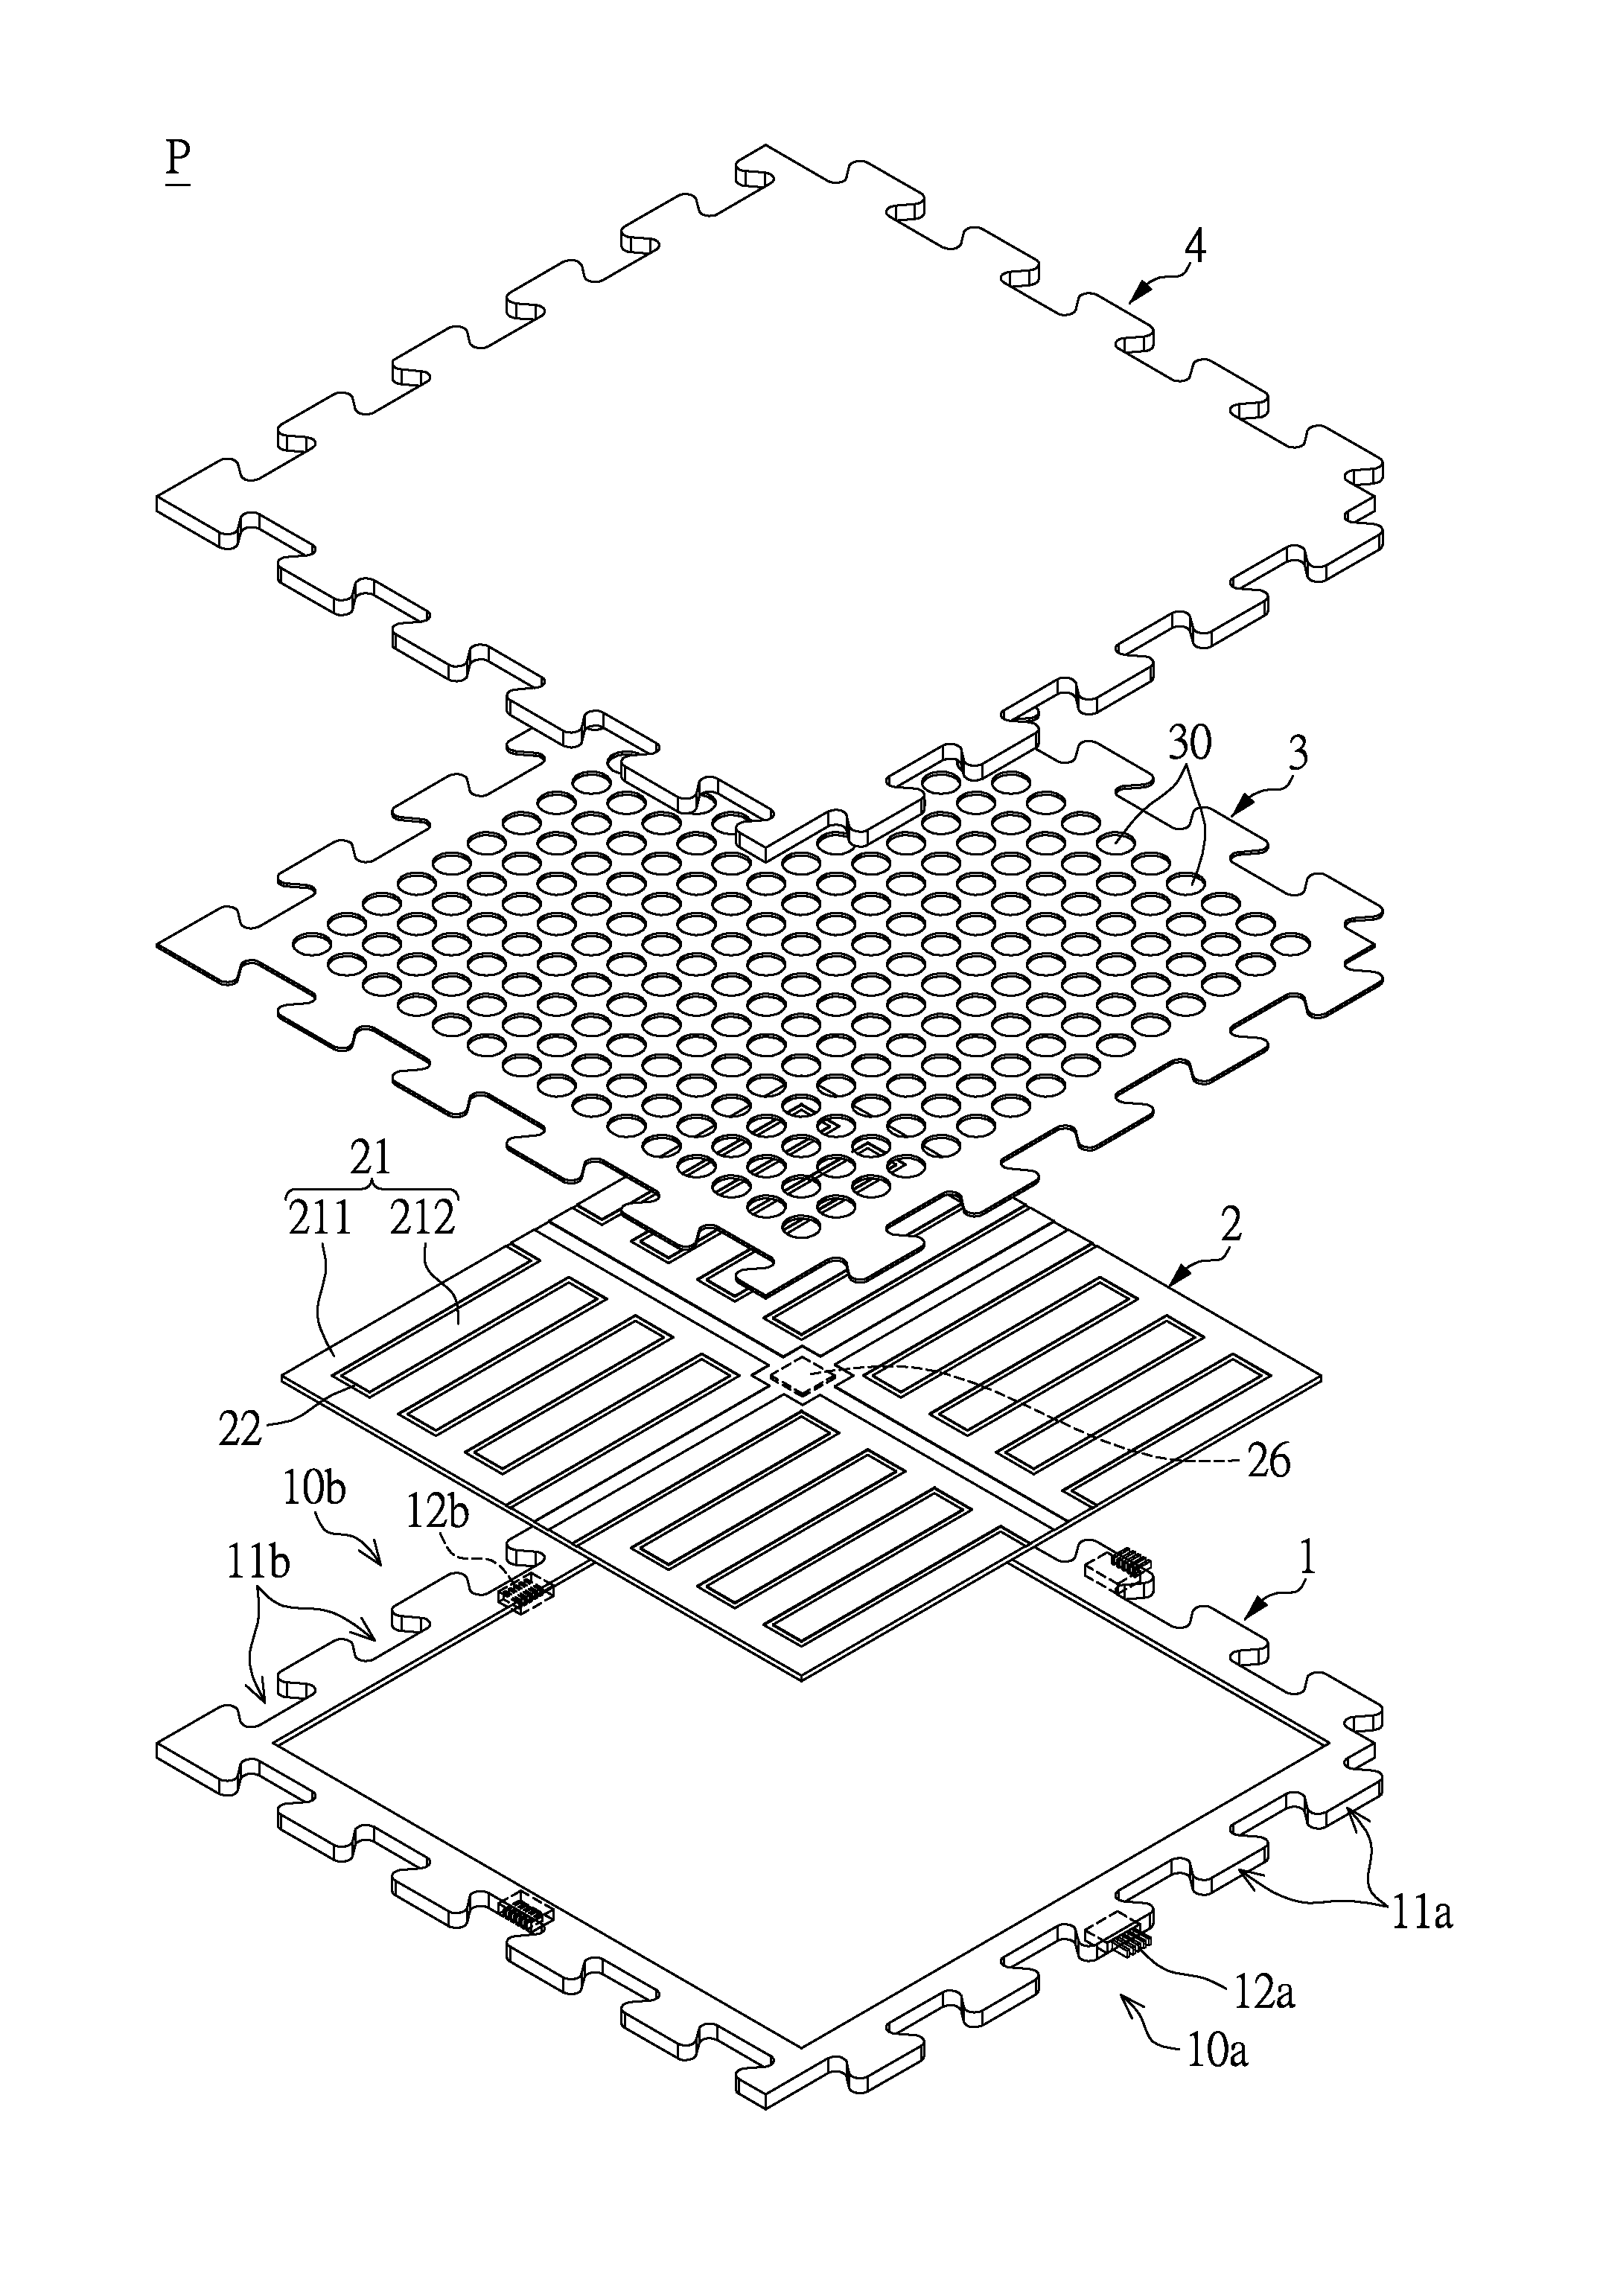 Activity-sensing ground pad and pad assembly having the same